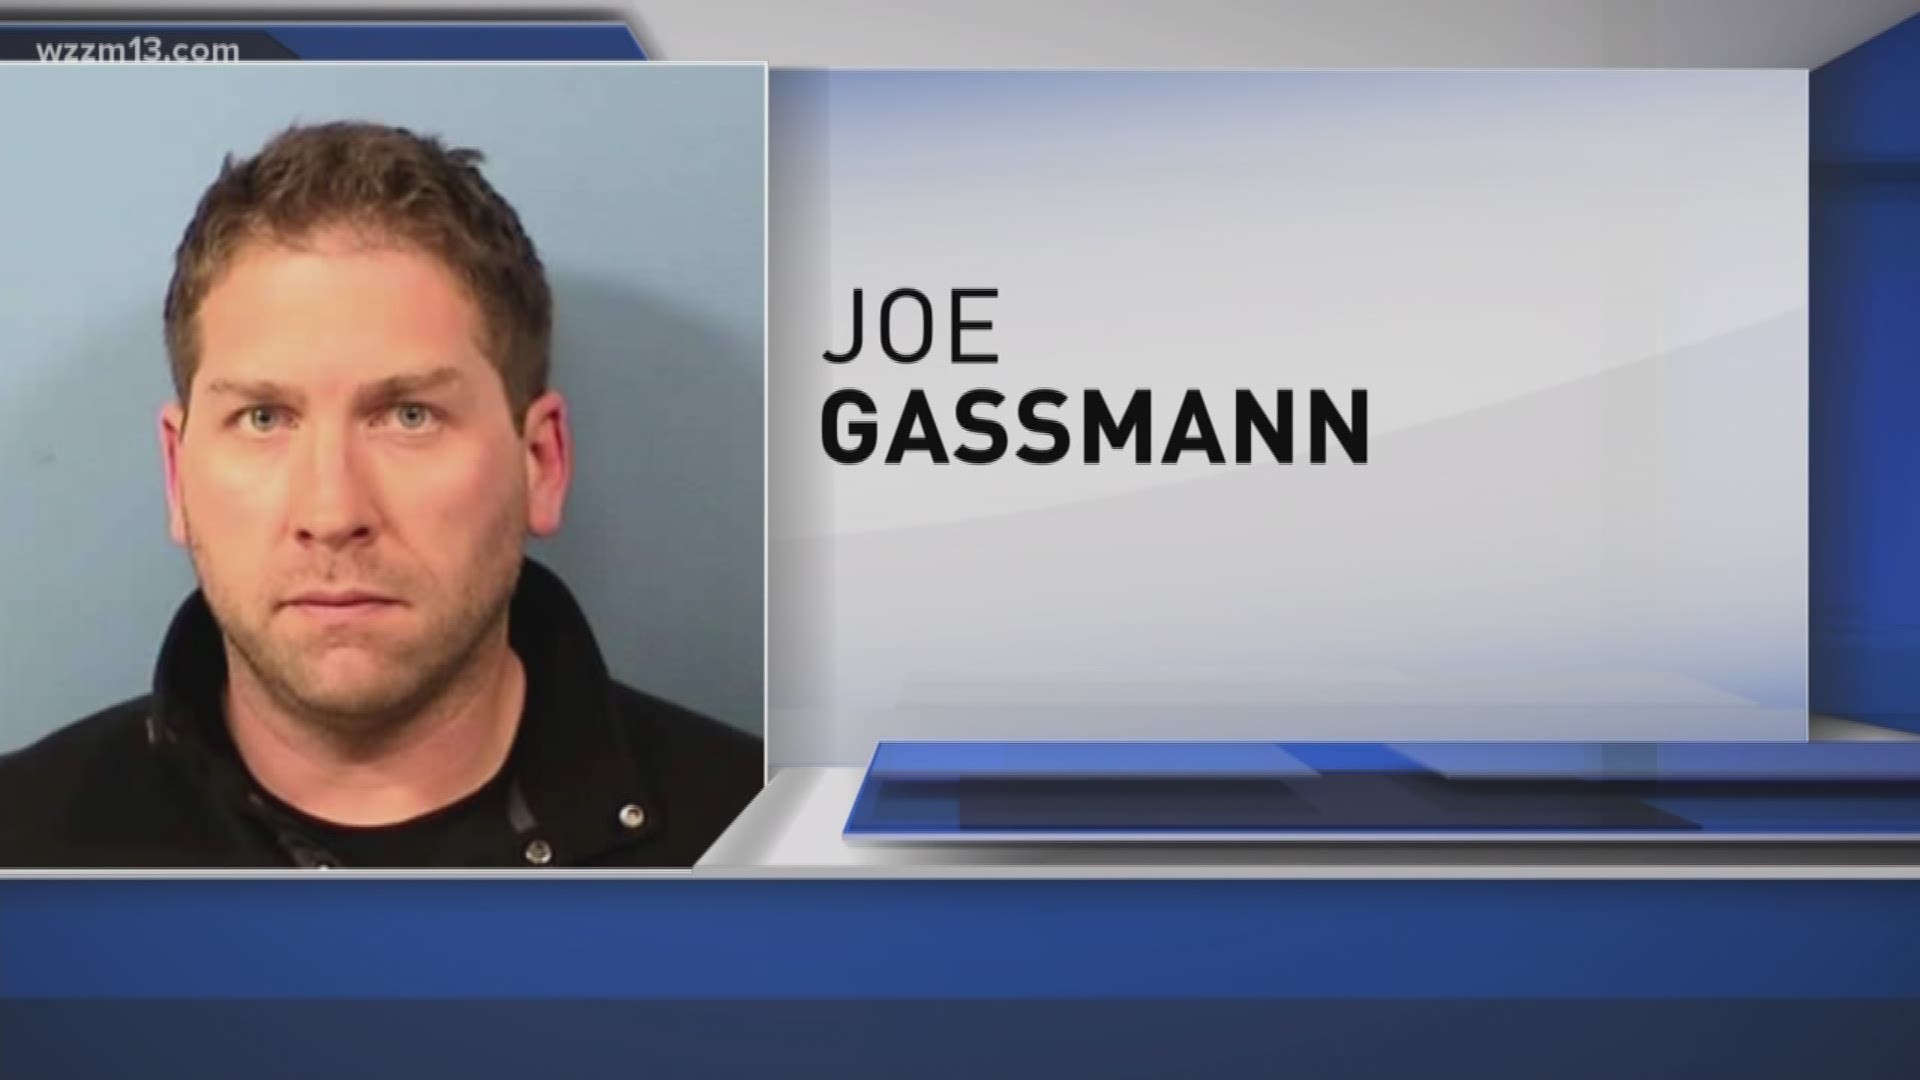 West Mich. radio personality arrested in Illinois